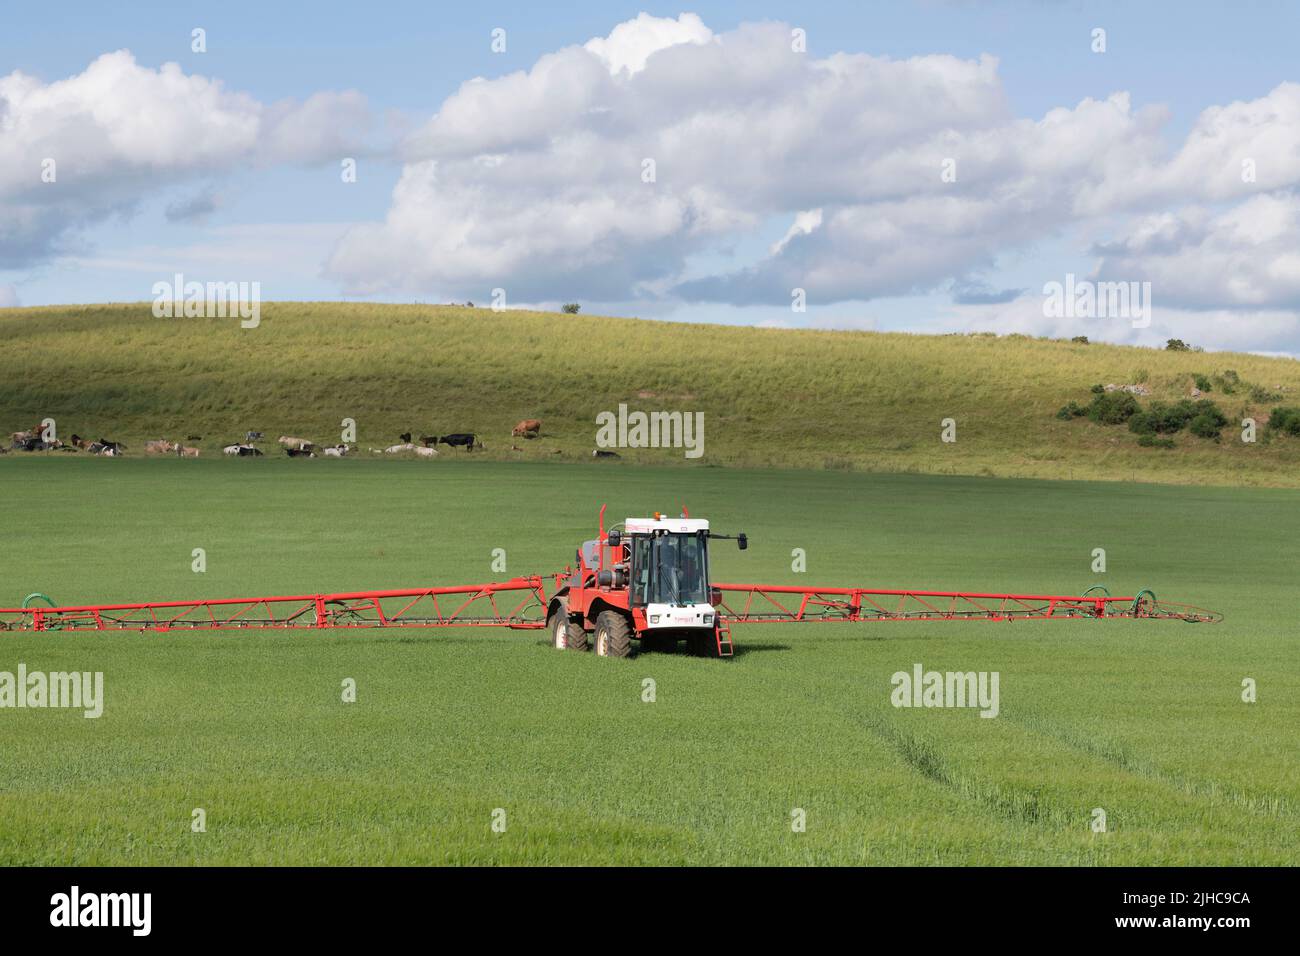 A Self Propelled Bateman Sprayer with Spray Boom Extended Operating in a Field of Grain in Summer Stock Photo